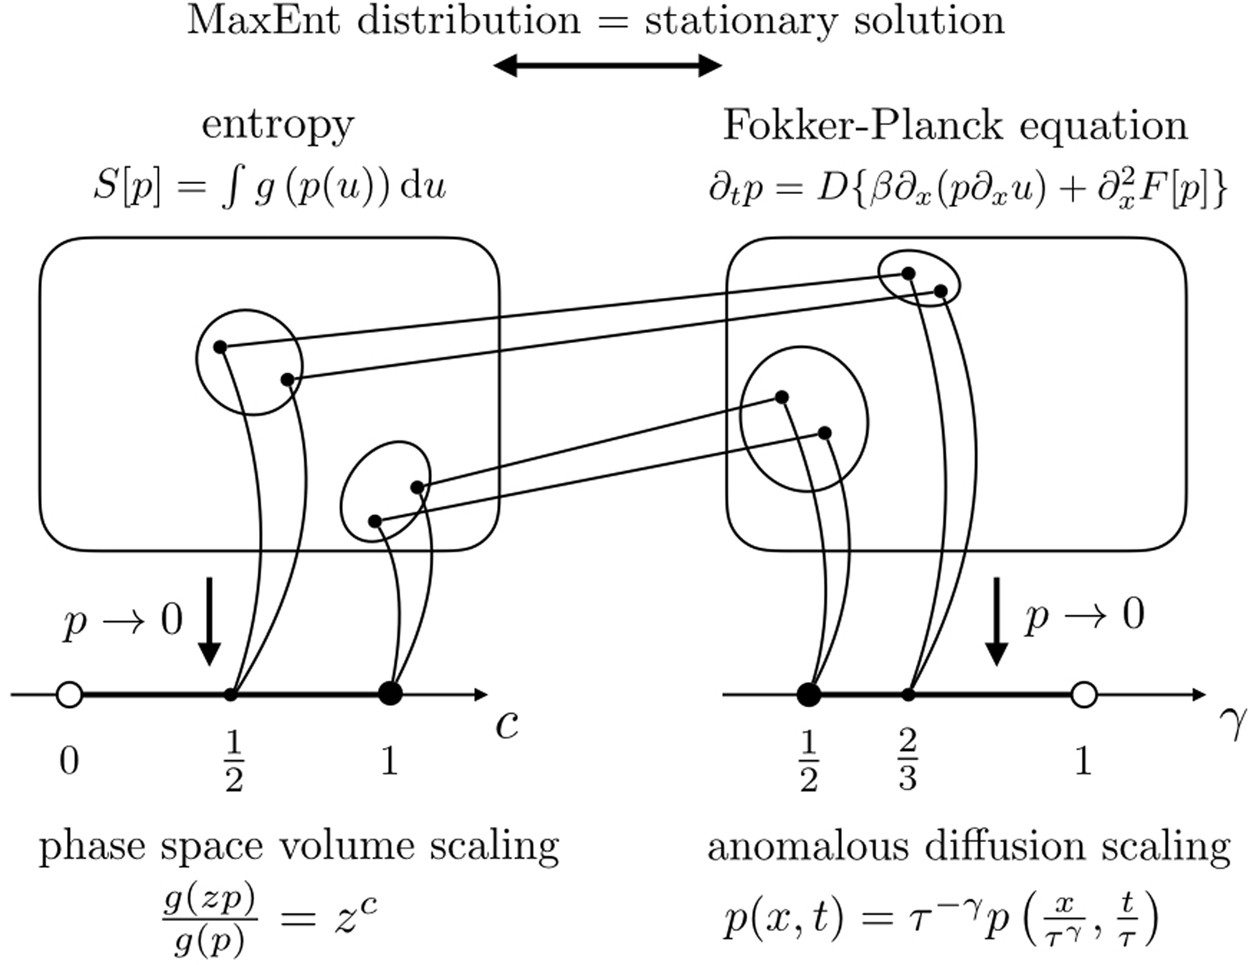 Phase Space Volume Scaling Of Generalized Entropies And Anomalous Diffusion Scaling Governed By Corresponding Non Linear Fokker Planck Equations Scientific Reports